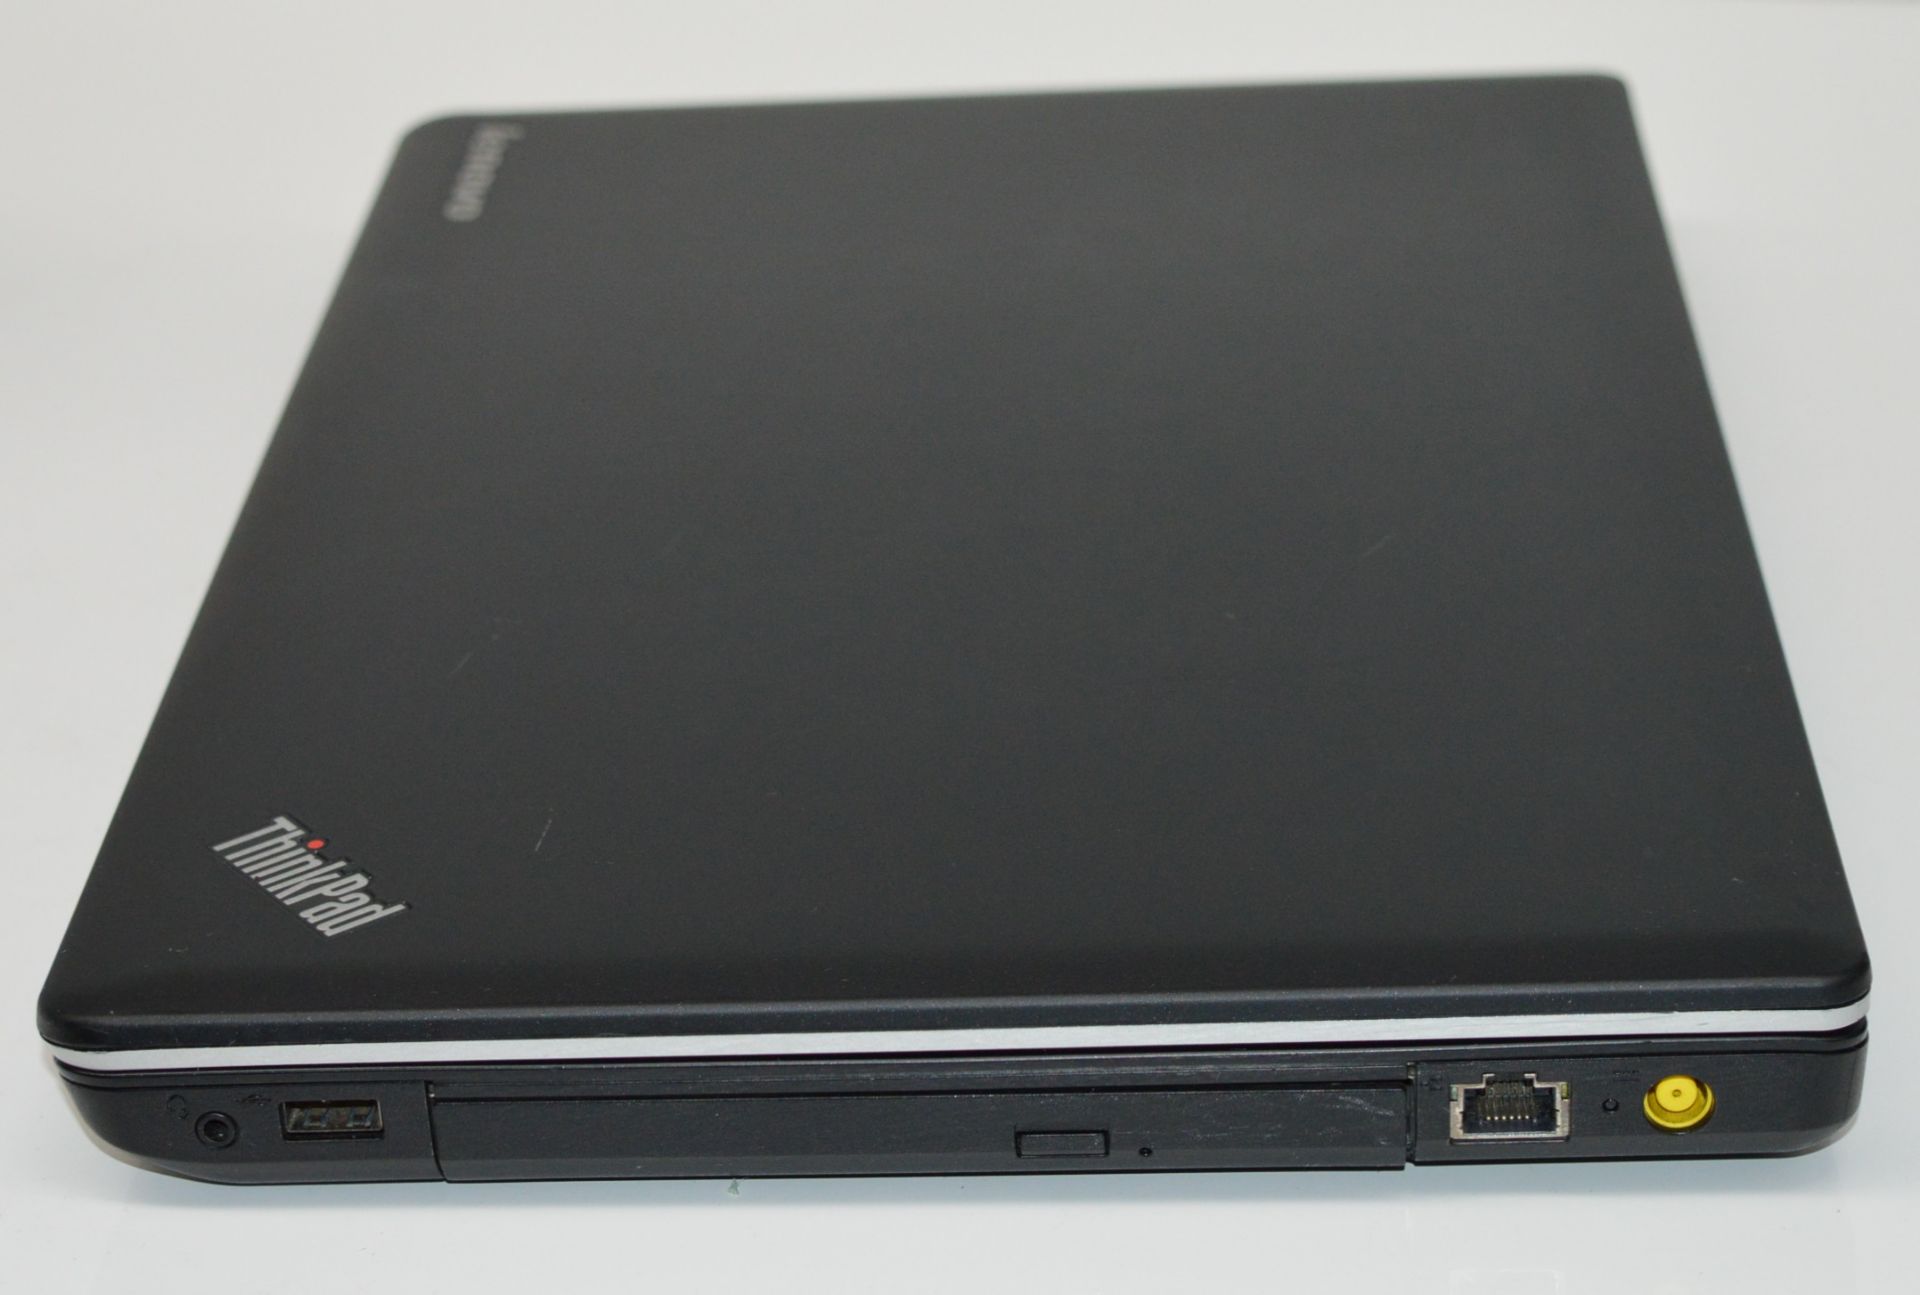 1 x Lenovo Thinkpad E530 Laptop Computer - Features 15.6 Inch Screen, Intel Core i3-2370M 2.4ghz - Image 5 of 5